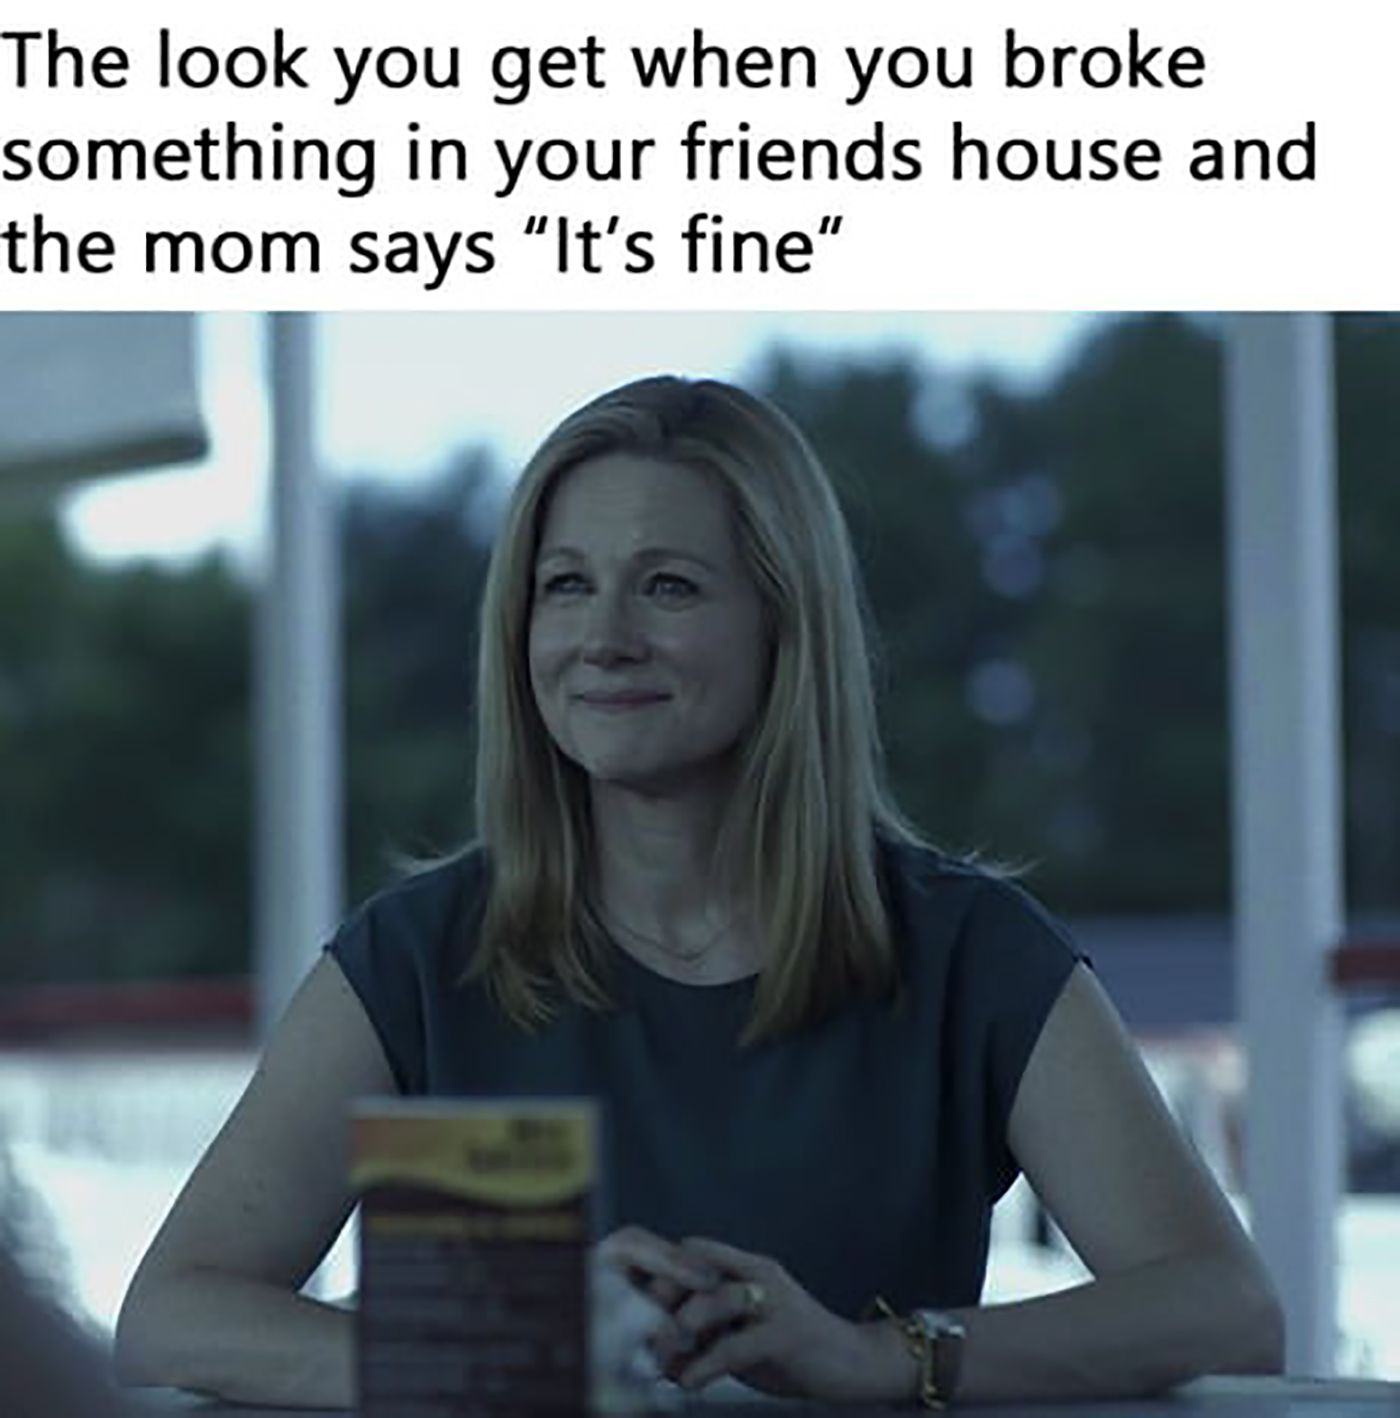 Wendy from Ozark fakes a smile in the meme.